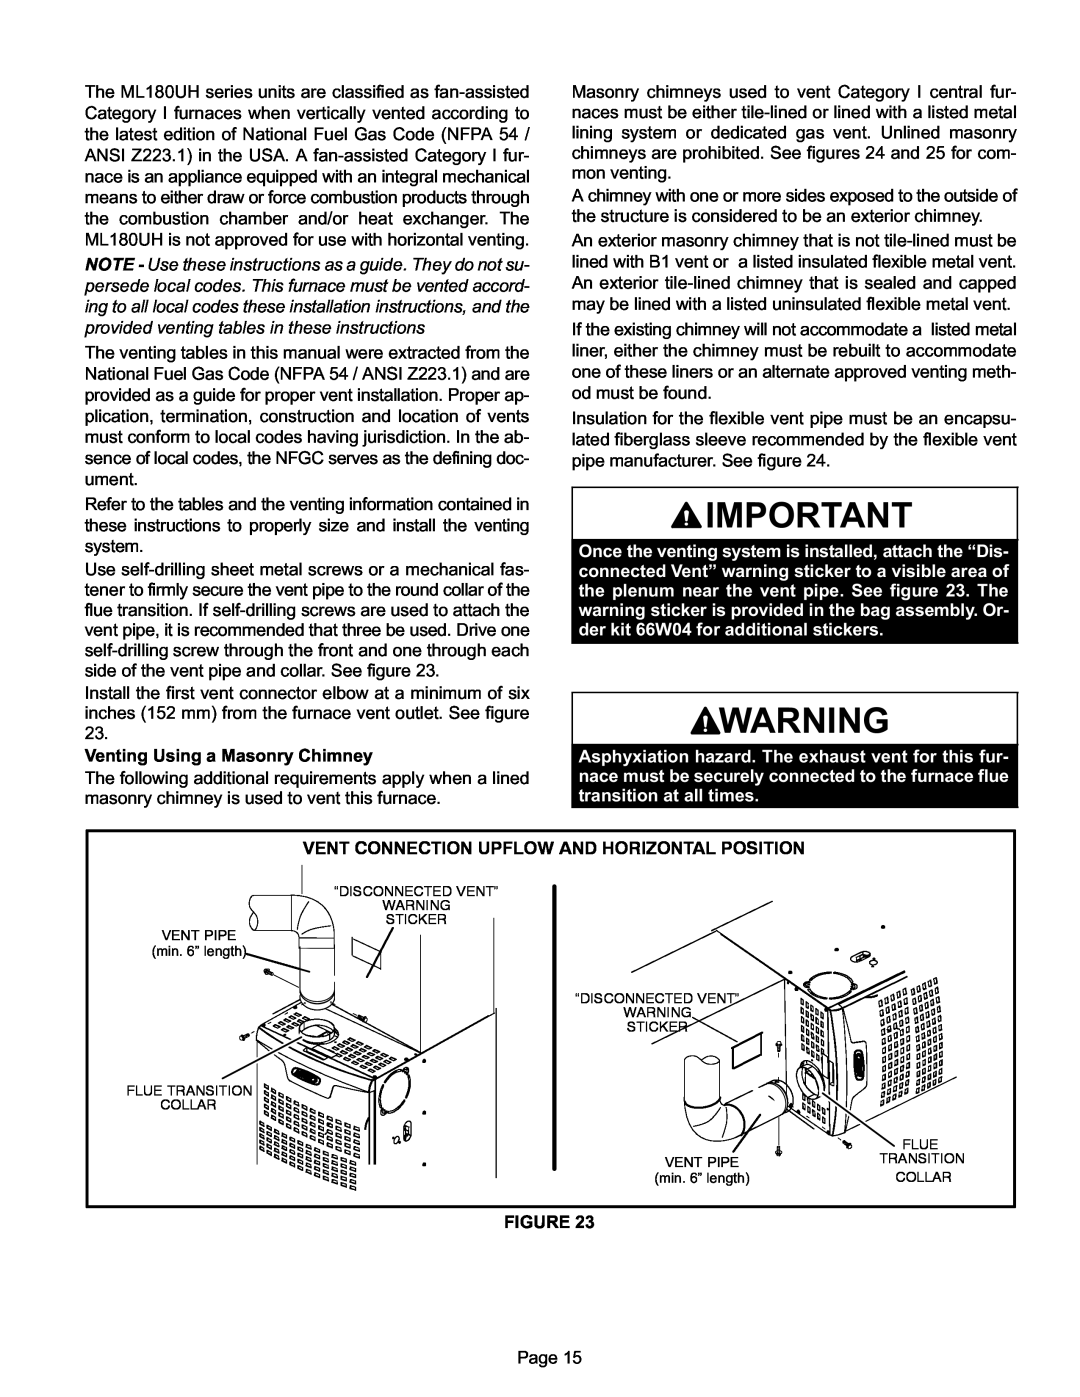 Lennox International Inc Merit Series Gas Furnace installation instructions Vent Connection Upflow And Horizontal Position 